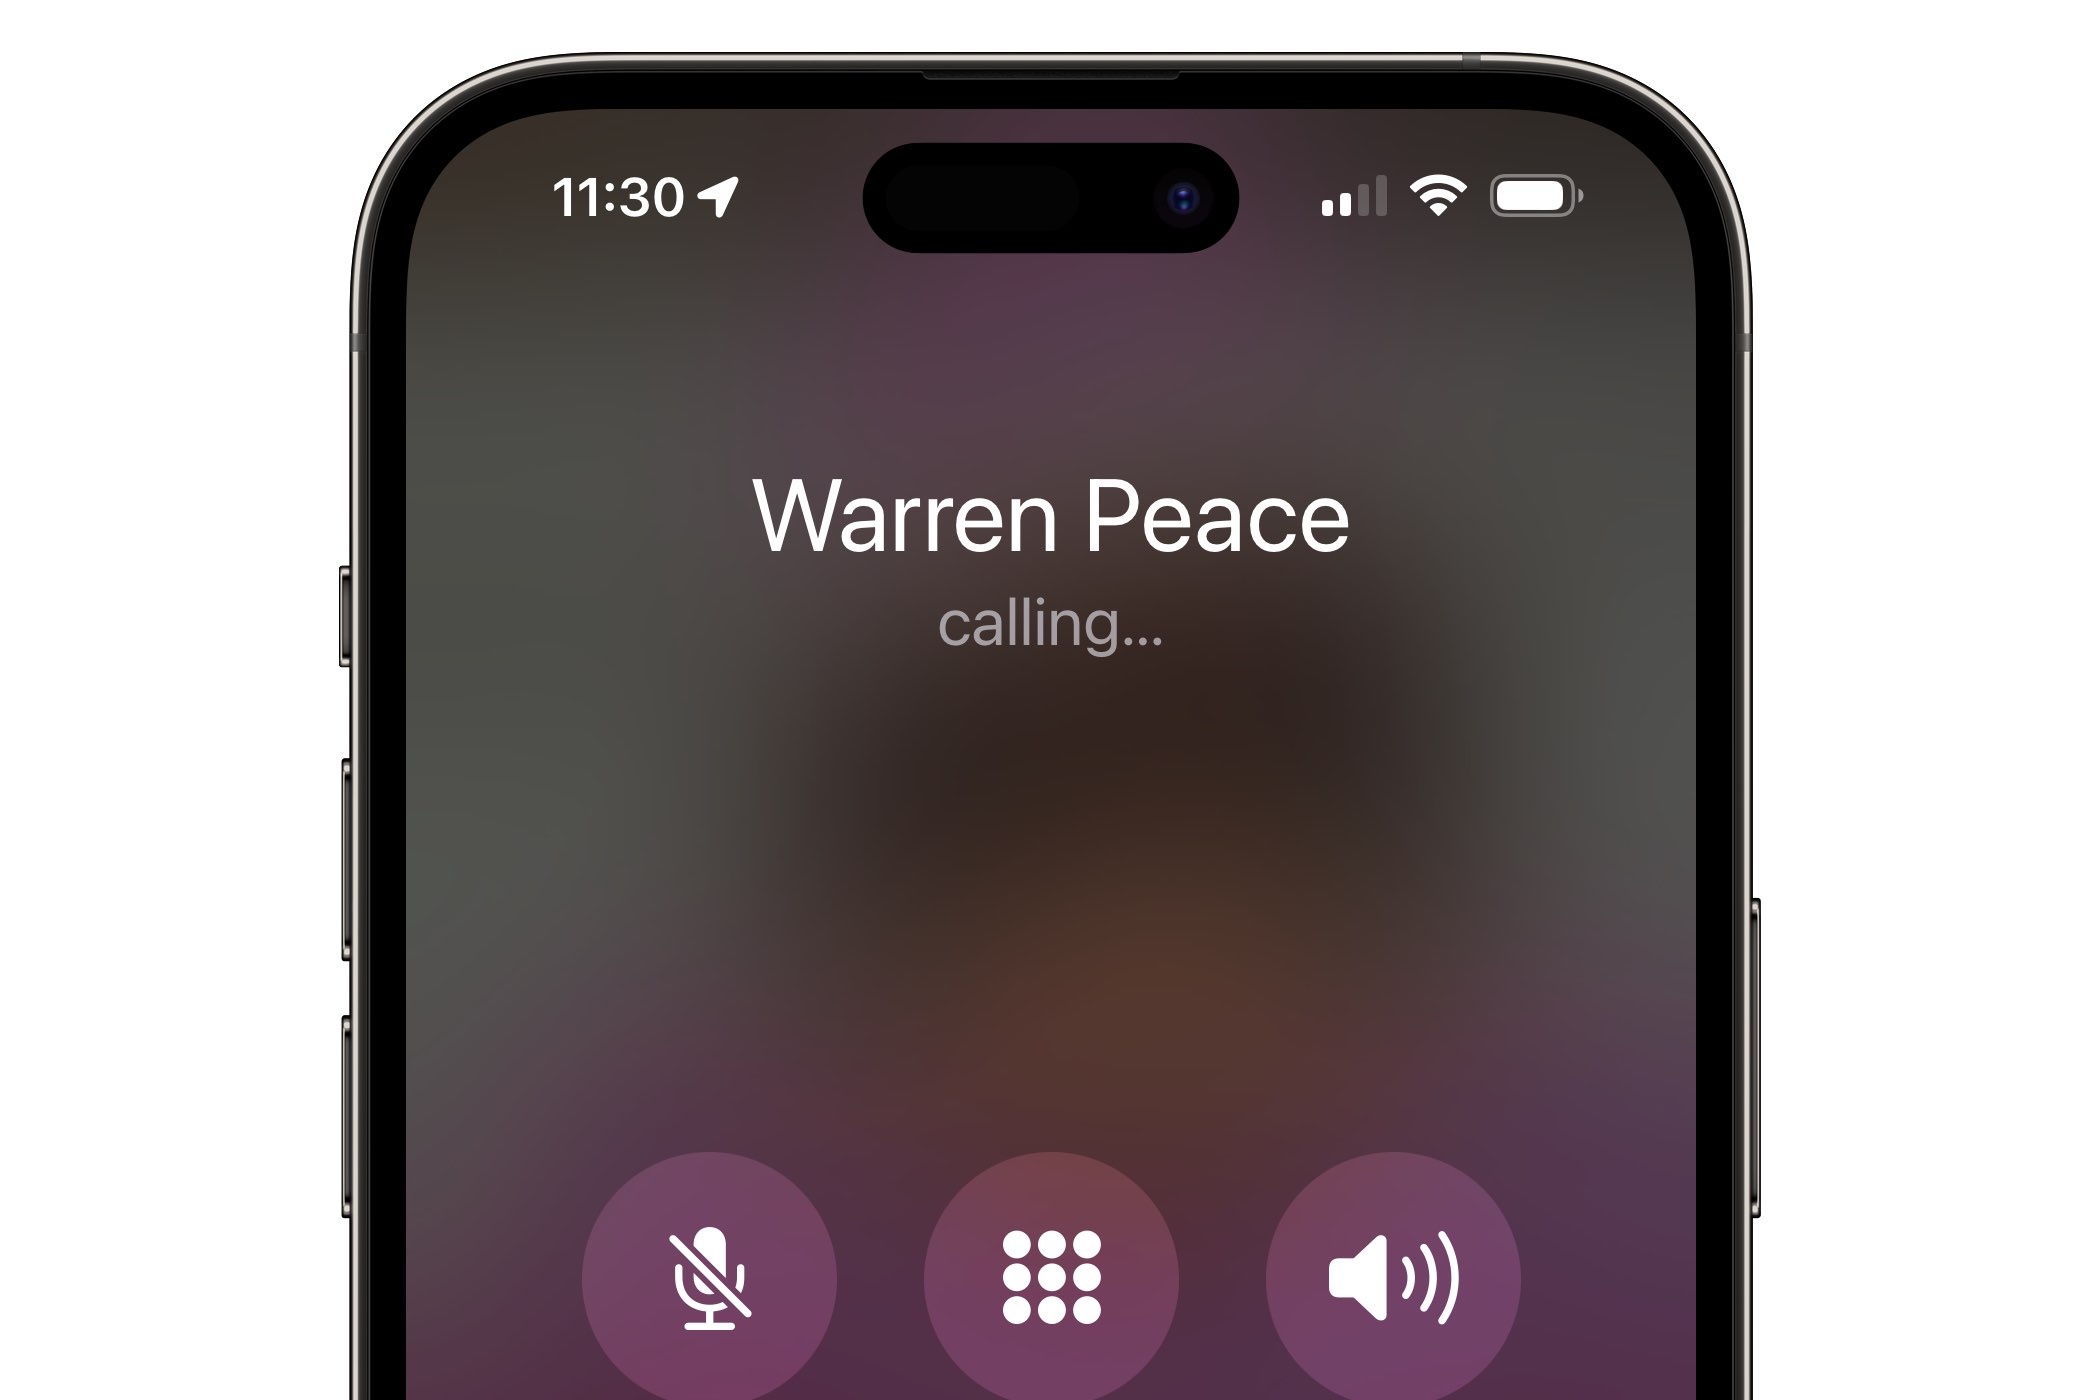 Outbound call screen on iPhone.